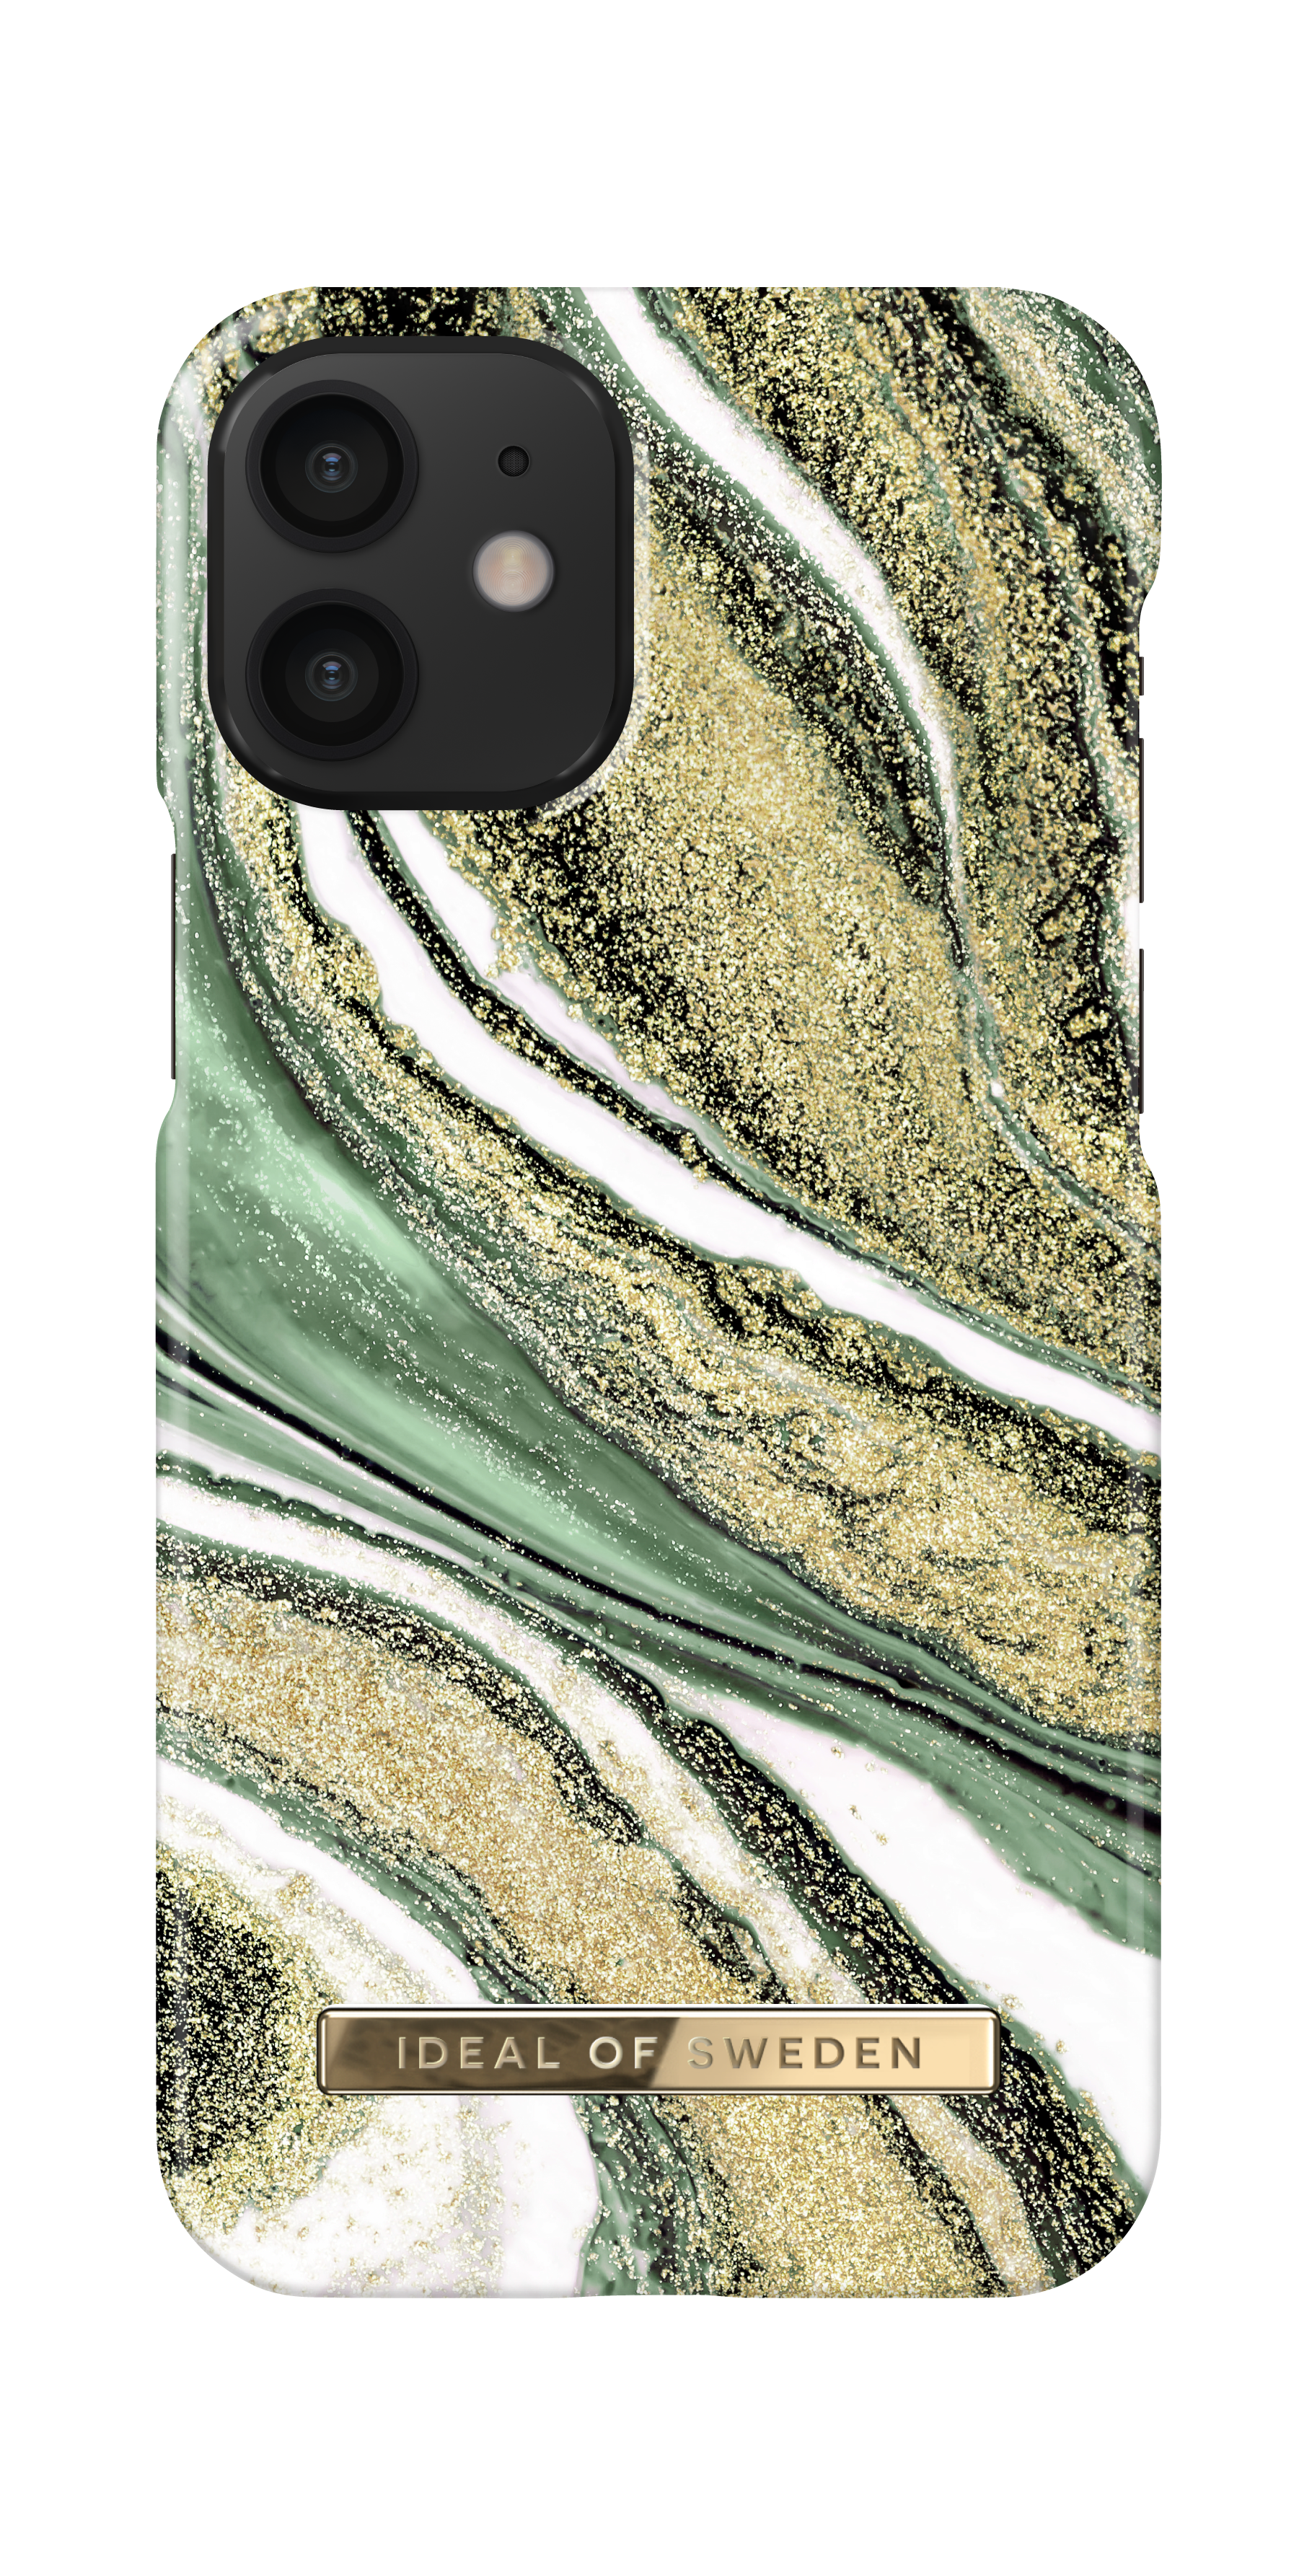 Apple, Cosmic Swirl SWEDEN IDEAL IPhone Green Mini, OF 12 Backcover, IDFCSS20-I2054-192,